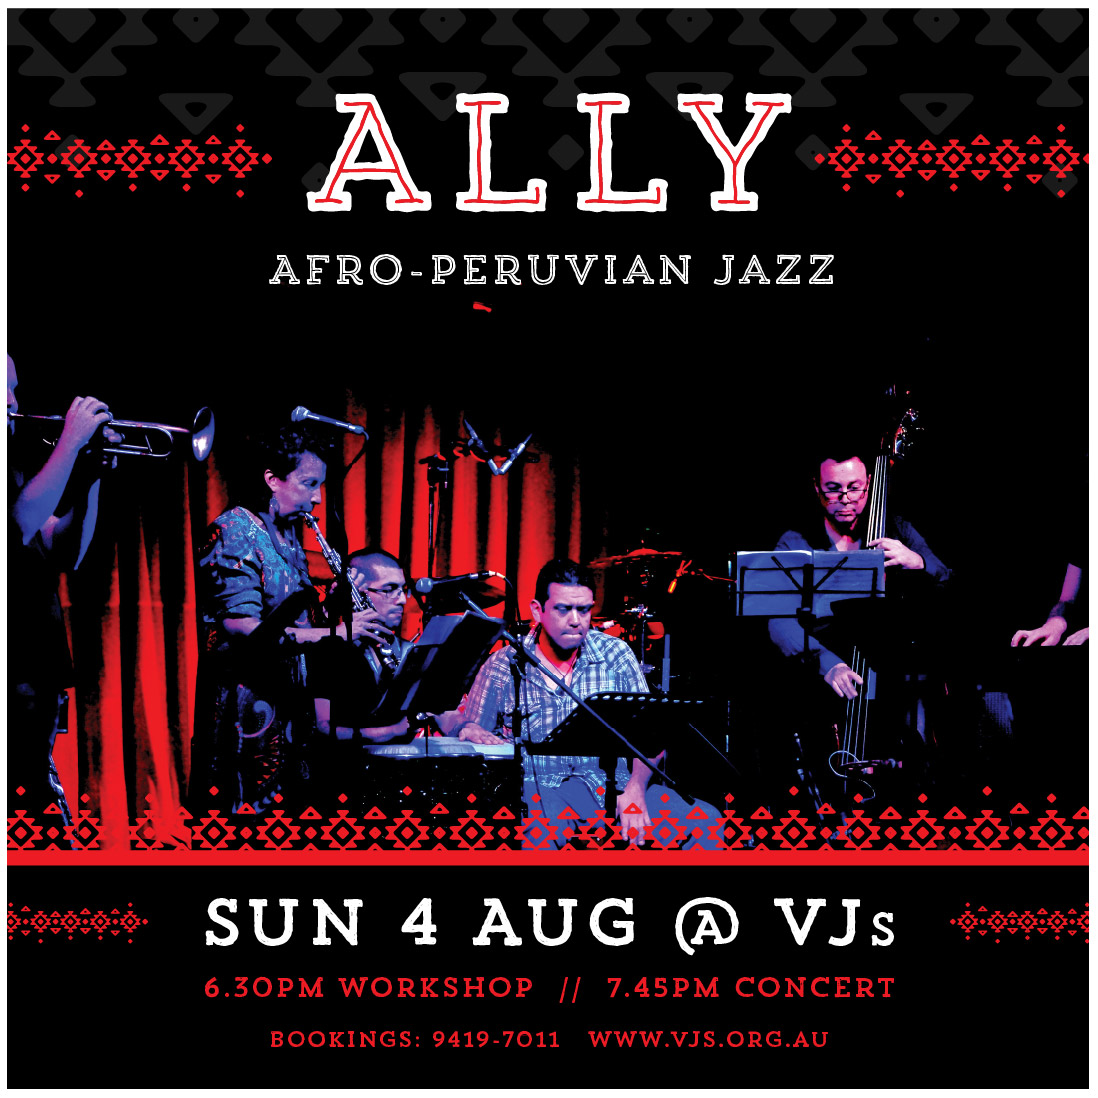 ALLY Afro-Peruvian Jazz Sunday 4 August @ VJs 6:30pm Workhsop, 7:45pm Concert Bookings 9419 7011 www.vjs.org.au